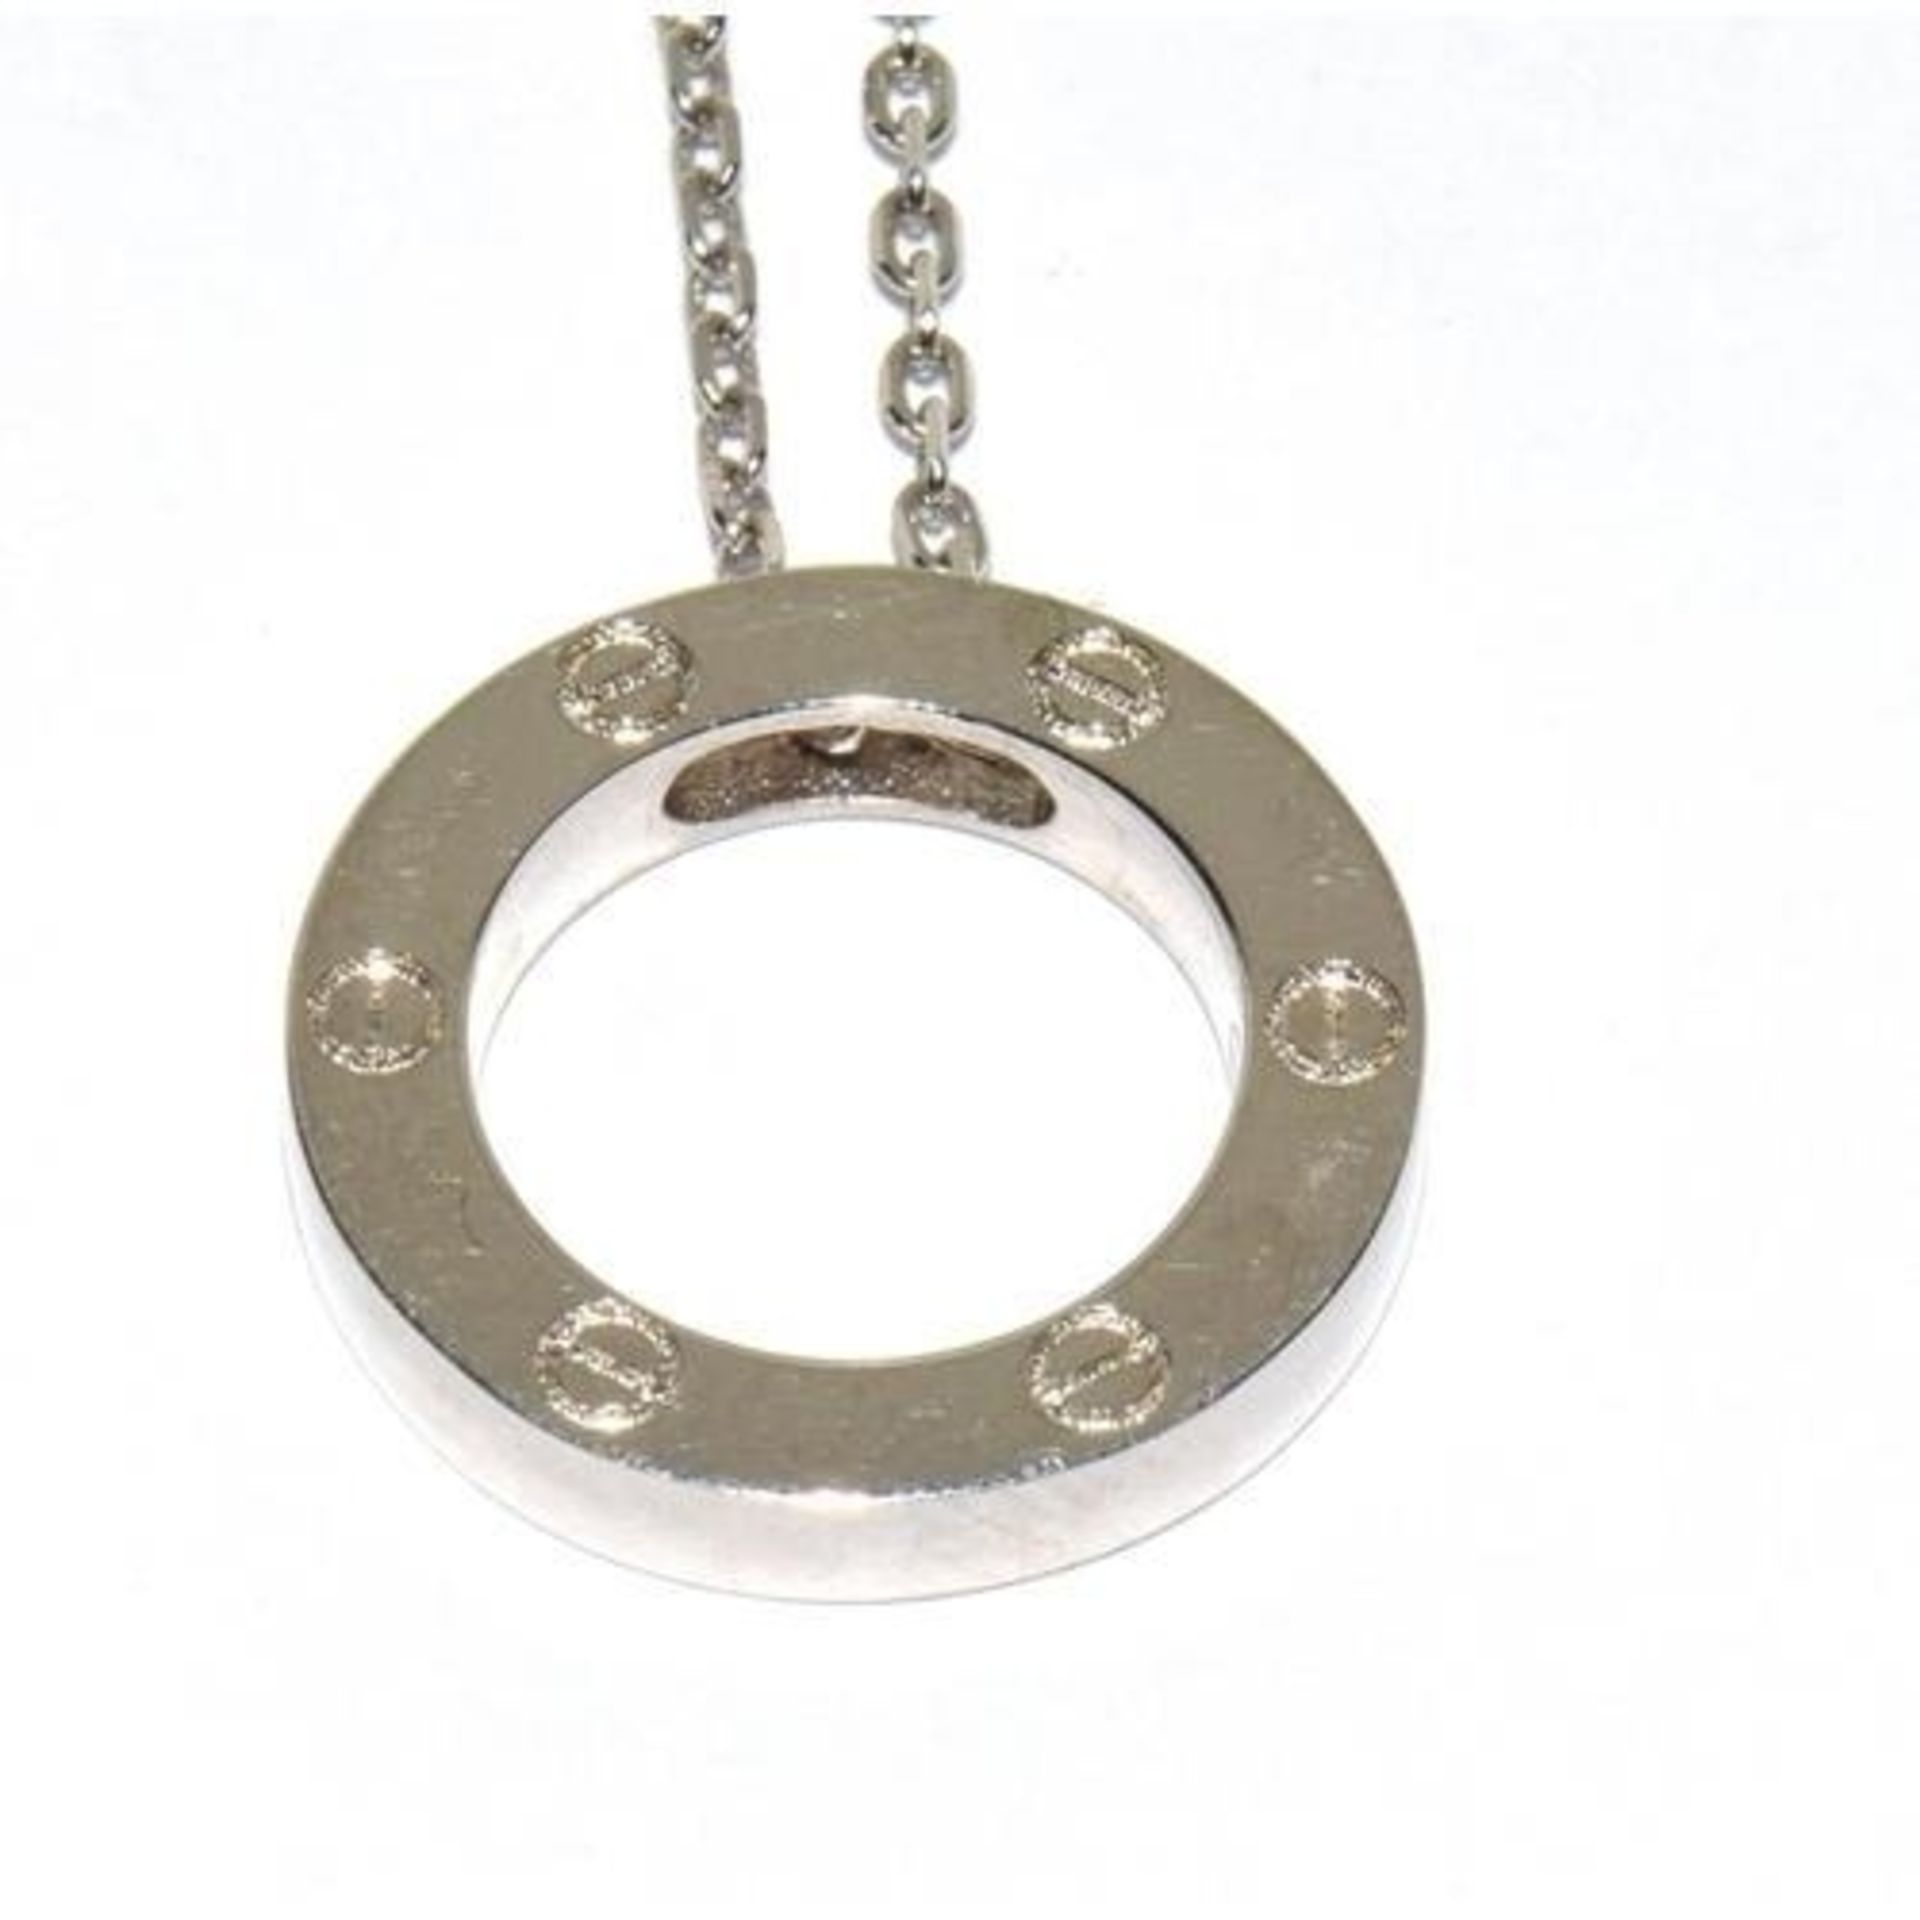 Marked 925 silver designer style drop pendant necklace - Image 2 of 4